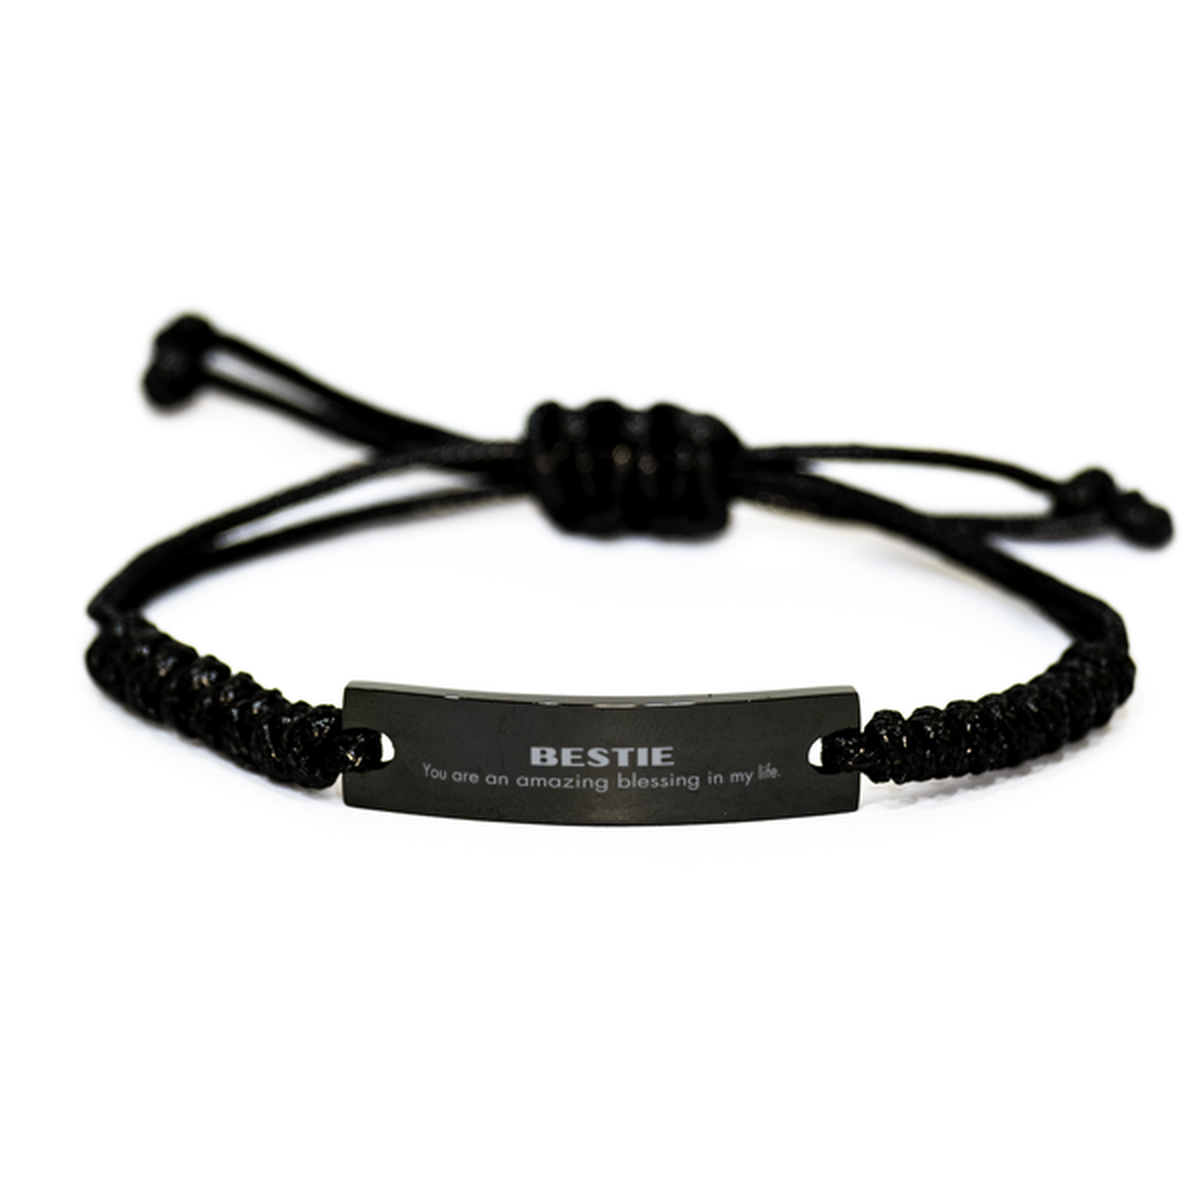 Bestie Black Rope Bracelet, You are an amazing blessing in my life, Thank You Gifts For Bestie, Inspirational Birthday Christmas Unique Gifts For Bestie